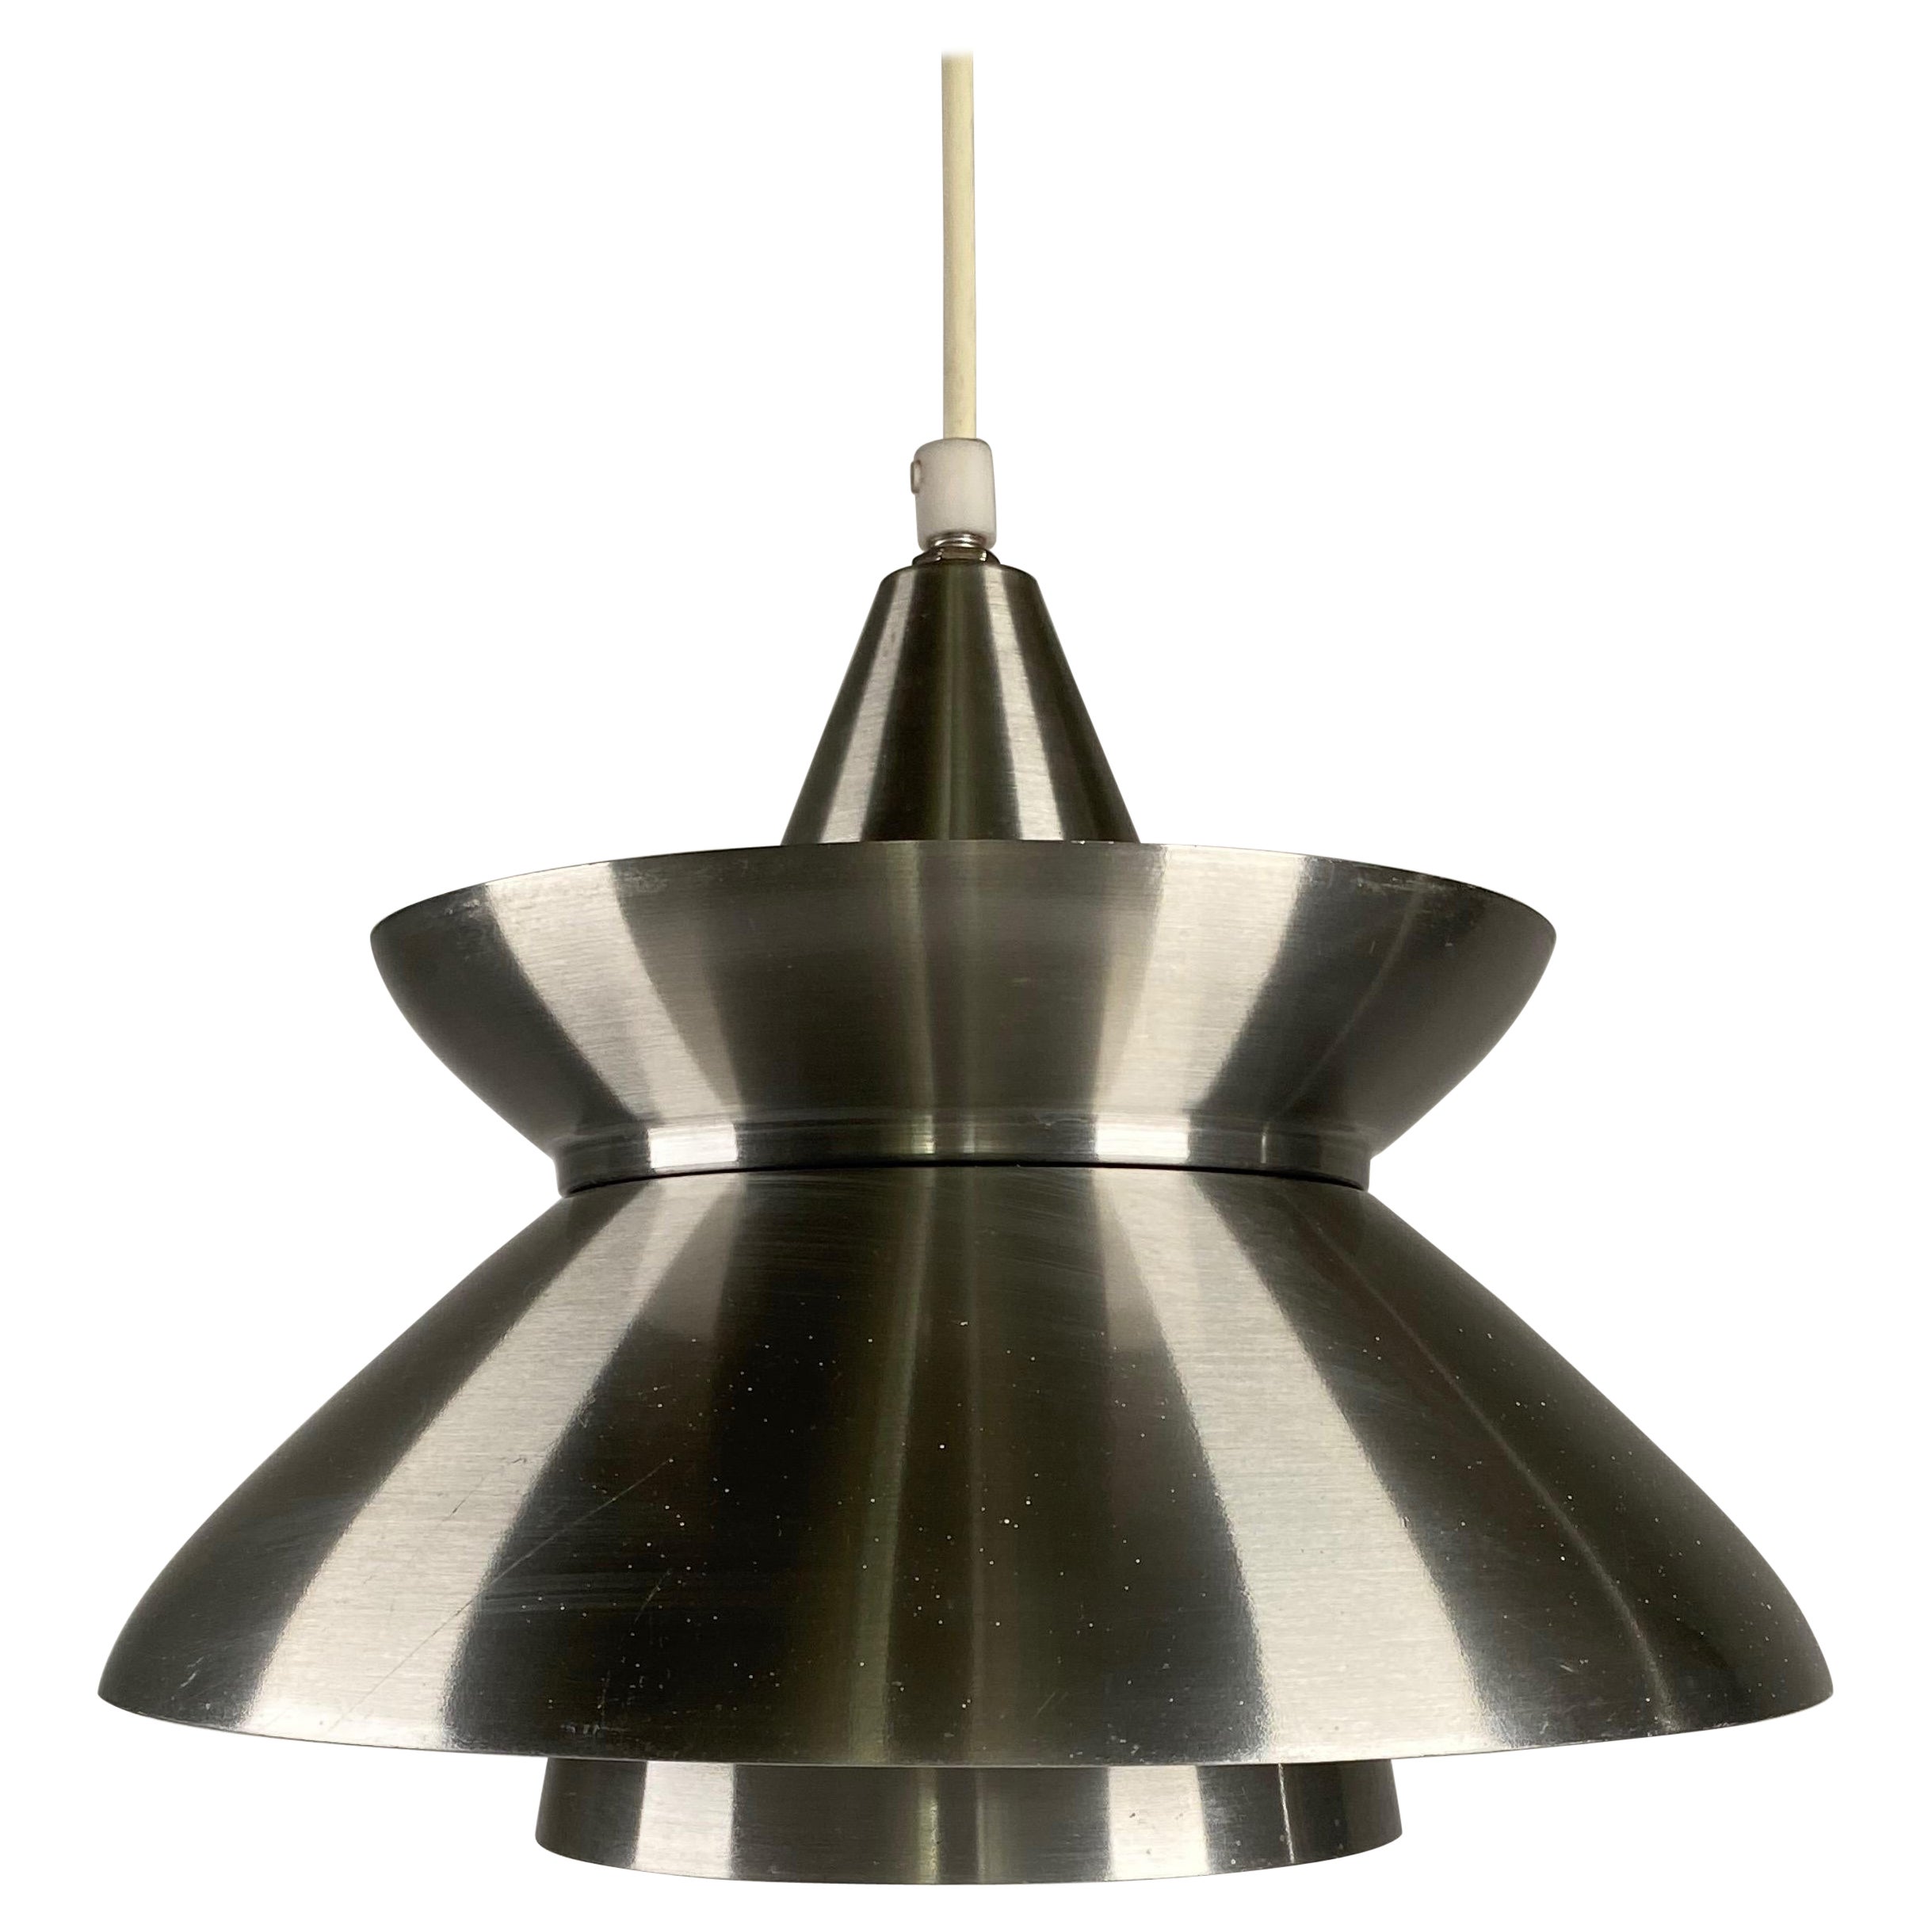 1970s Louis Poulsen "Navy Pendant" or "Doo-Wop" Lamp For Sale at 1stDibs